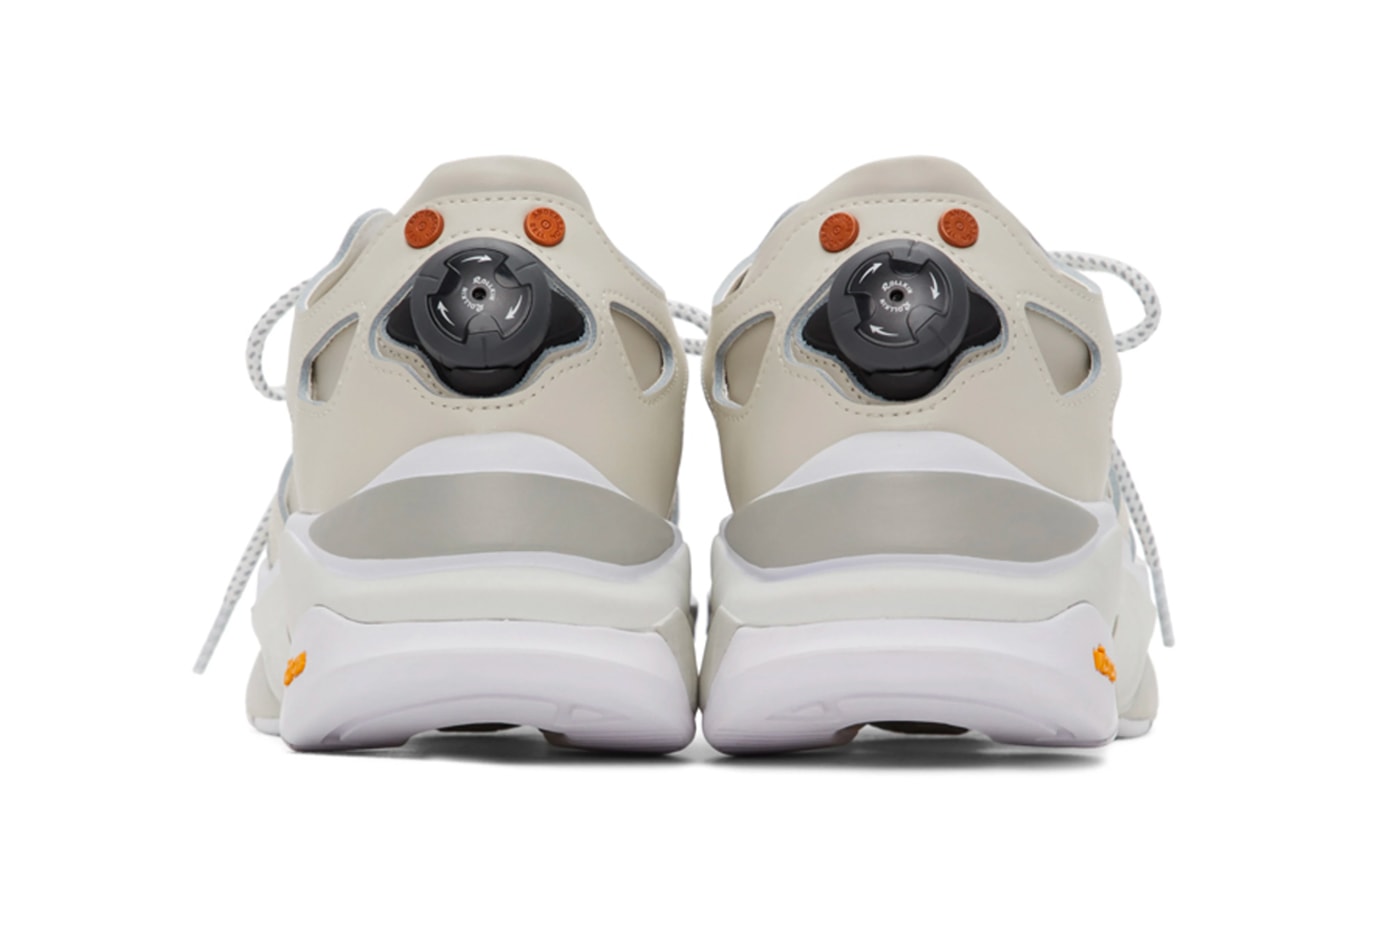 Andersson Bell White Runner Sneakers 201375M237016 Rollkin vibram footwear sneakers kicks trainers runners shoes technical fall winter 2020 collection made in south korea technical